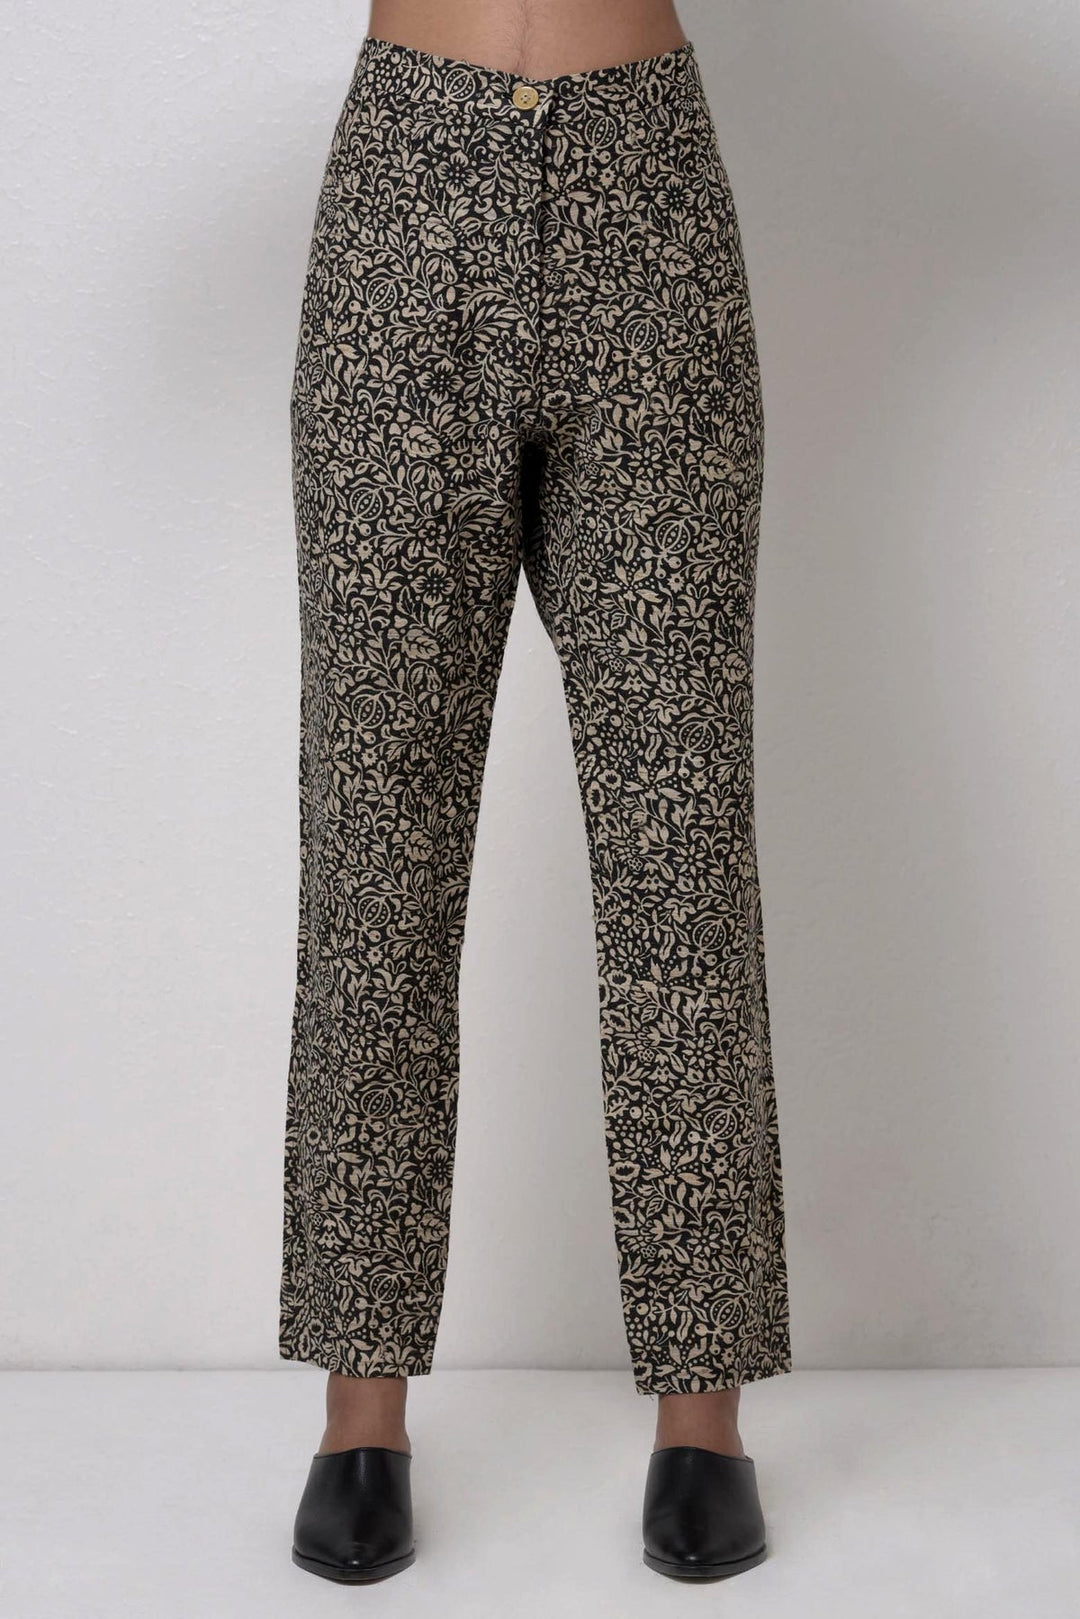 Beige & Black Silk Trouser with Pockets | Printed Trouser With Side Pockets - Beige & Black